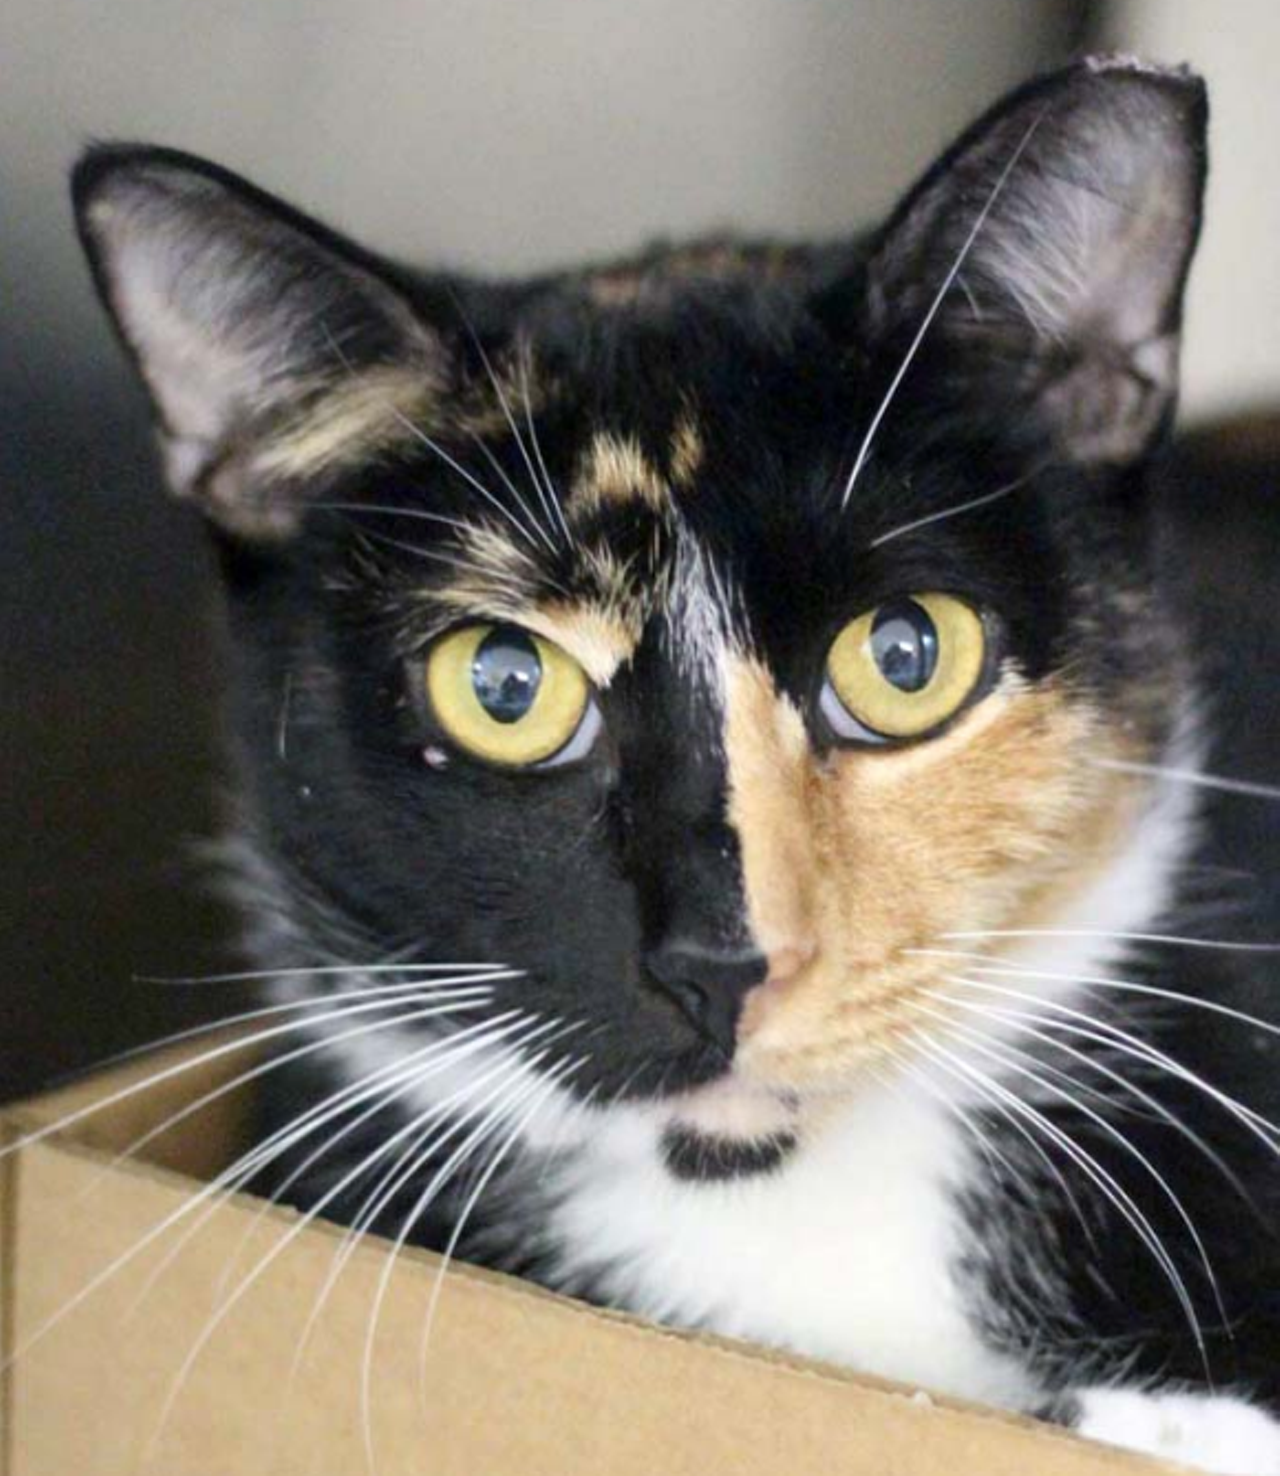 Crissy
"Don’t I have a unique face? I have a unique personality too! Anyone would be so happy to have me in their home. Are you that person? If so, you should come adopt me today!"